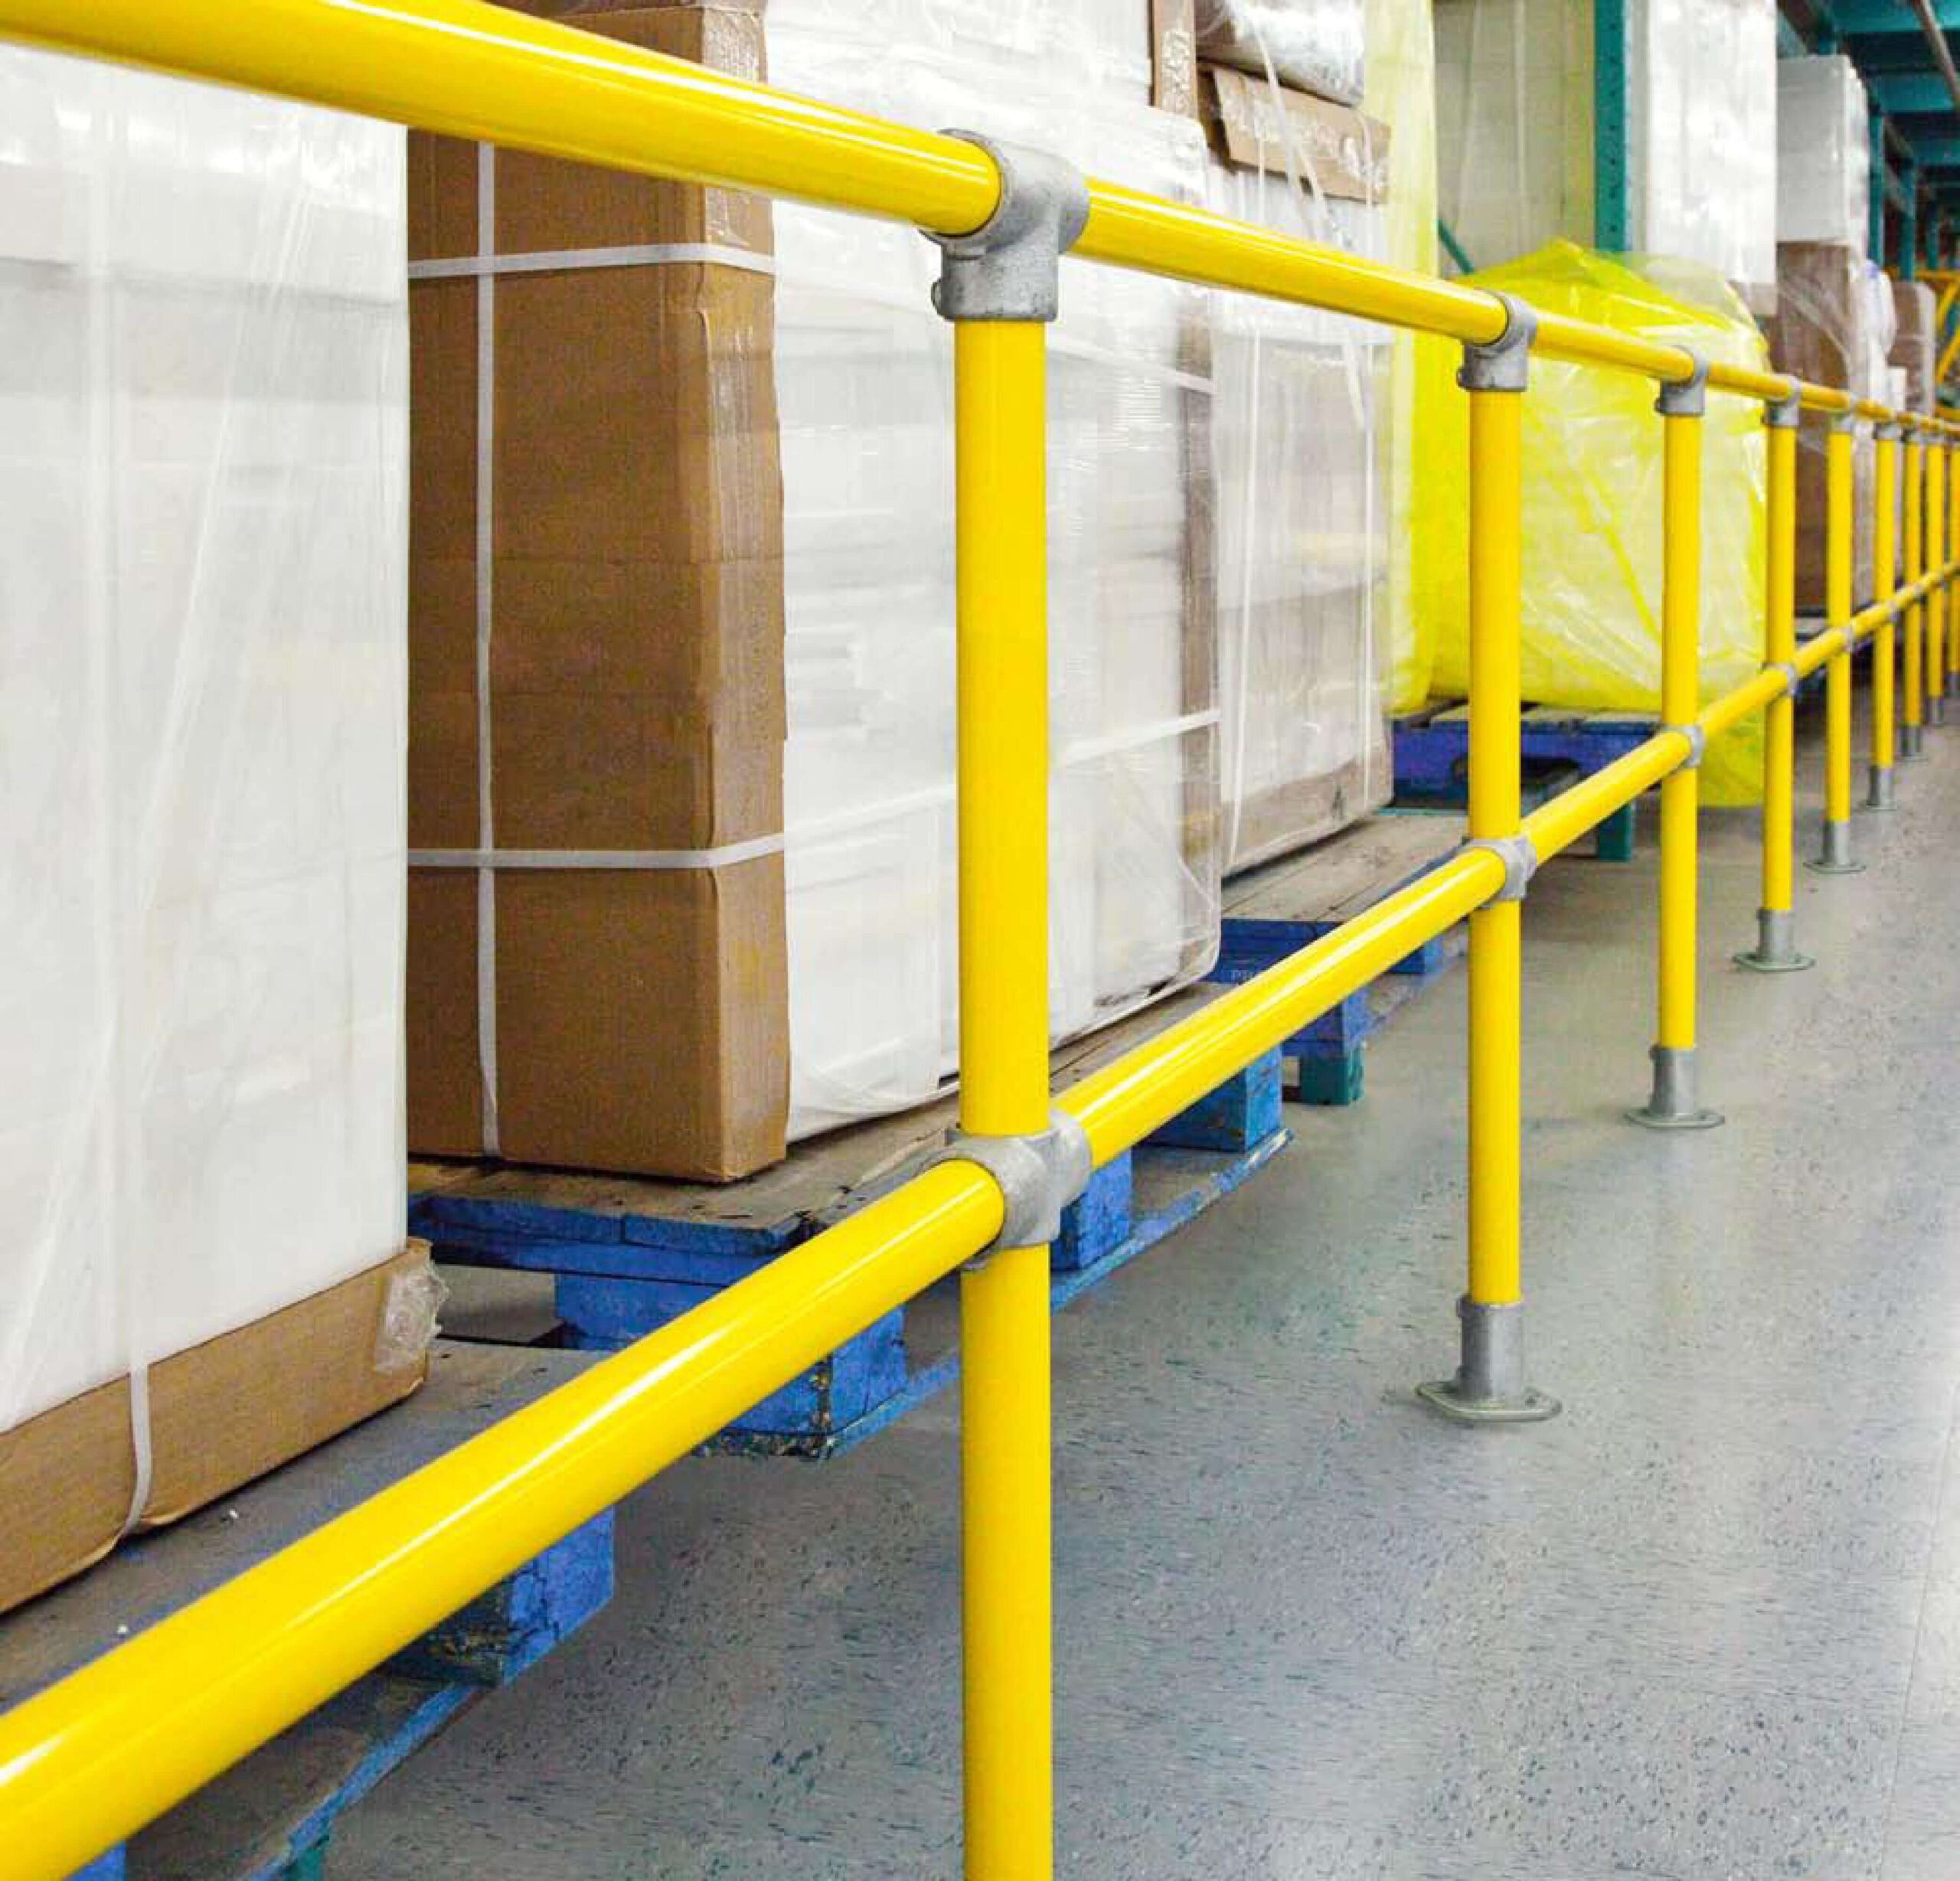 _Sell Sheet Warehouse trafic control barrier-cropped